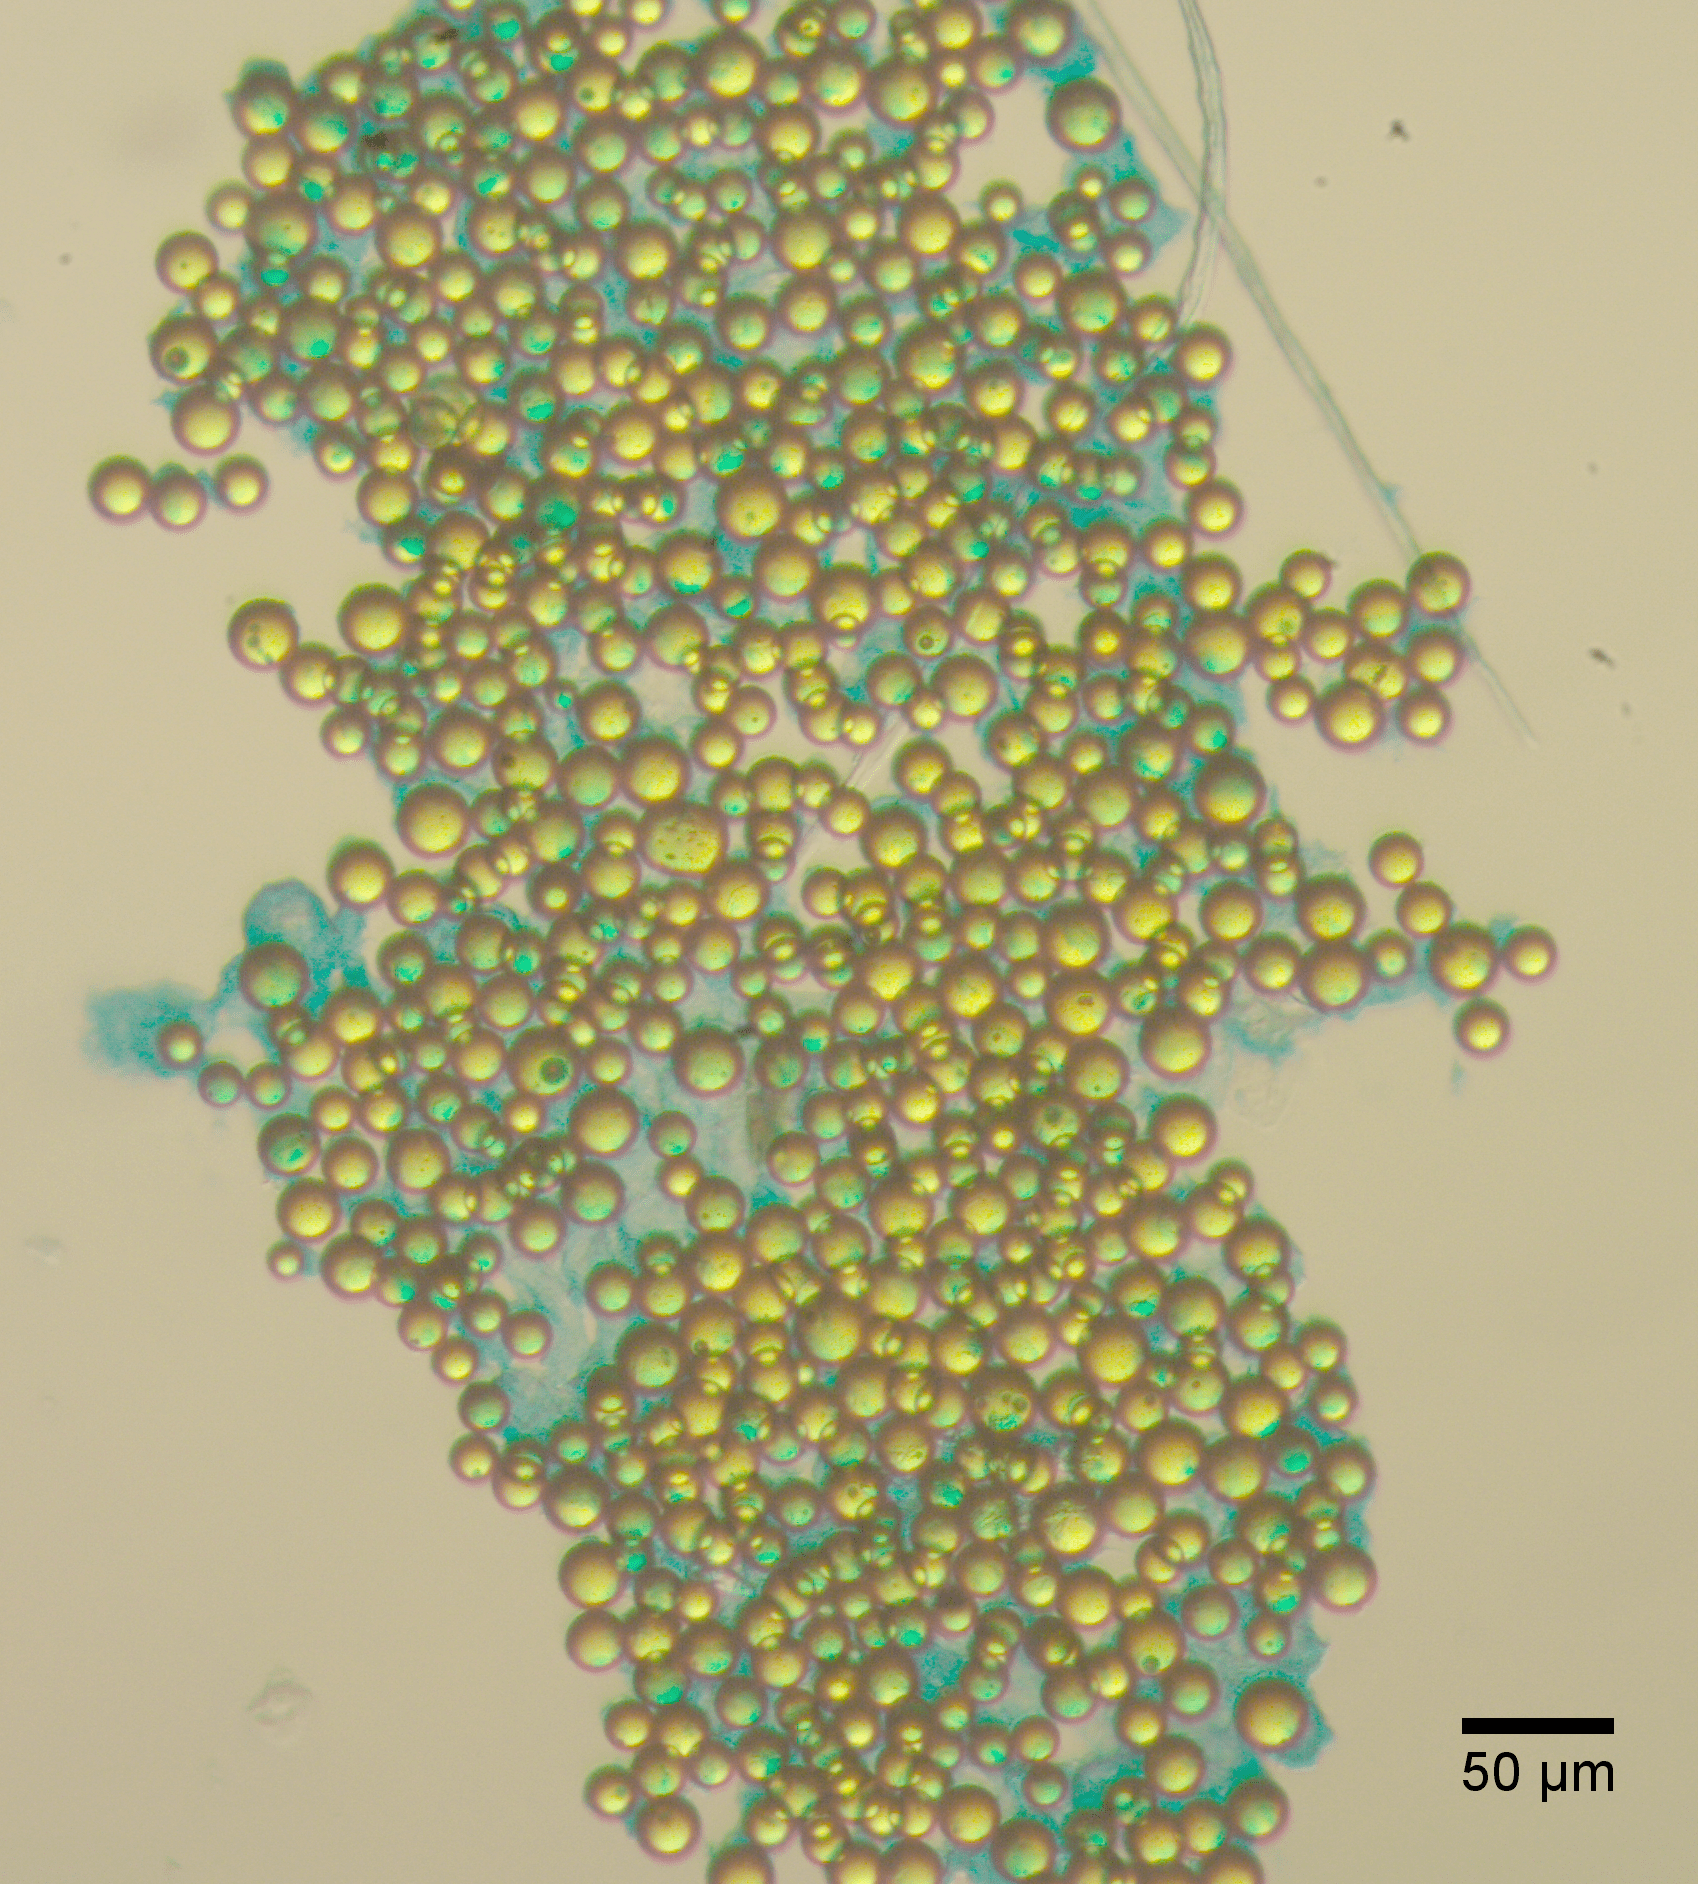 Figure 2: Microplastic agglomerates formed in natural seawater after a 7-day incubation 